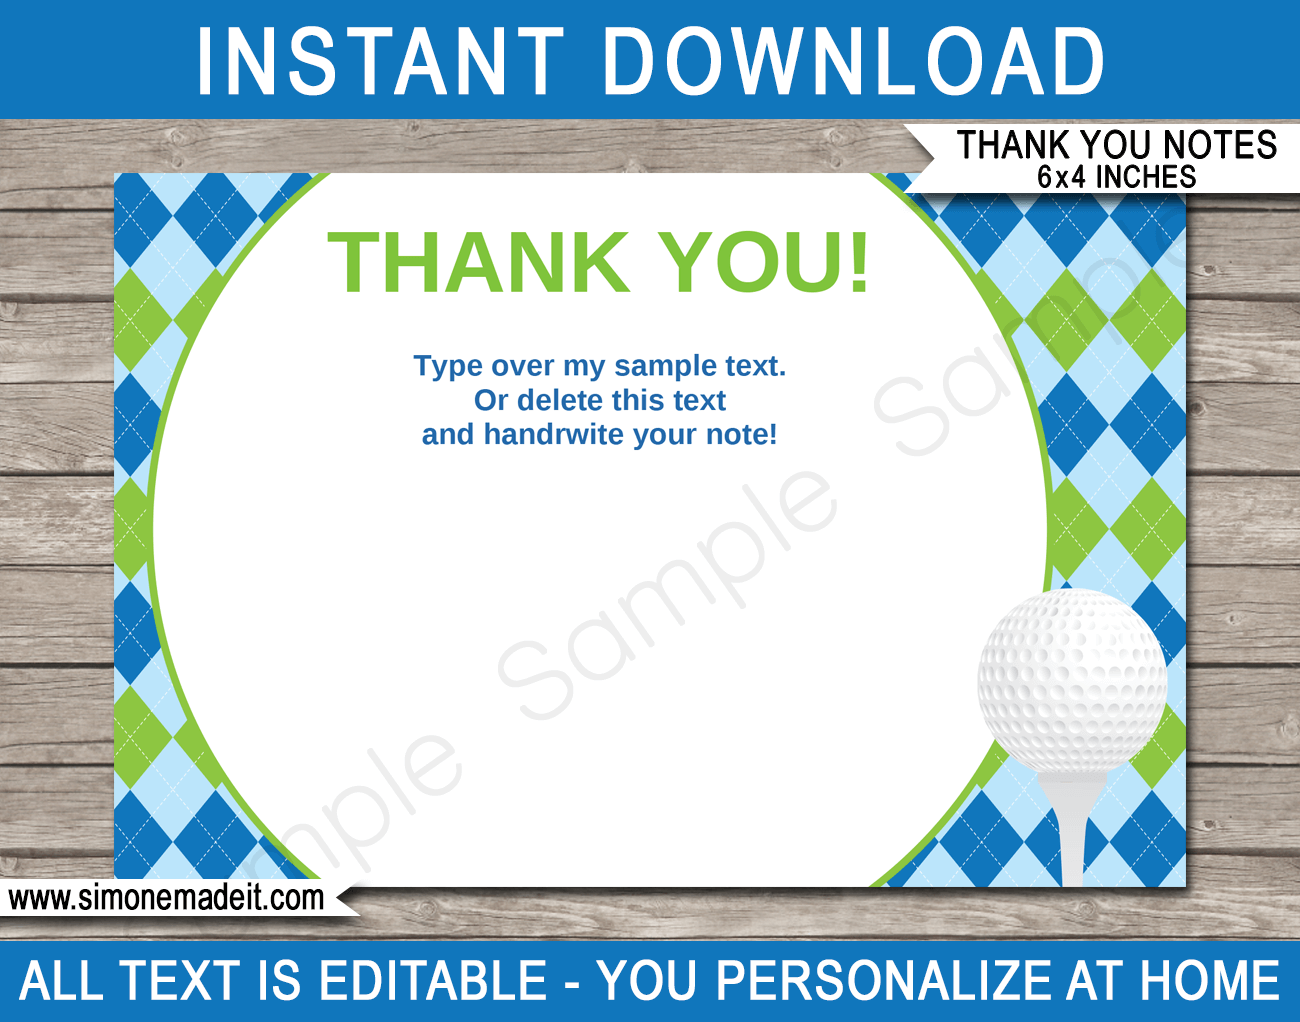 Printable Golf Party Thank You Note Cards - Favor Tags - Golf Birthday Party theme - Editable Template - Instant Download via simonemadeit.com